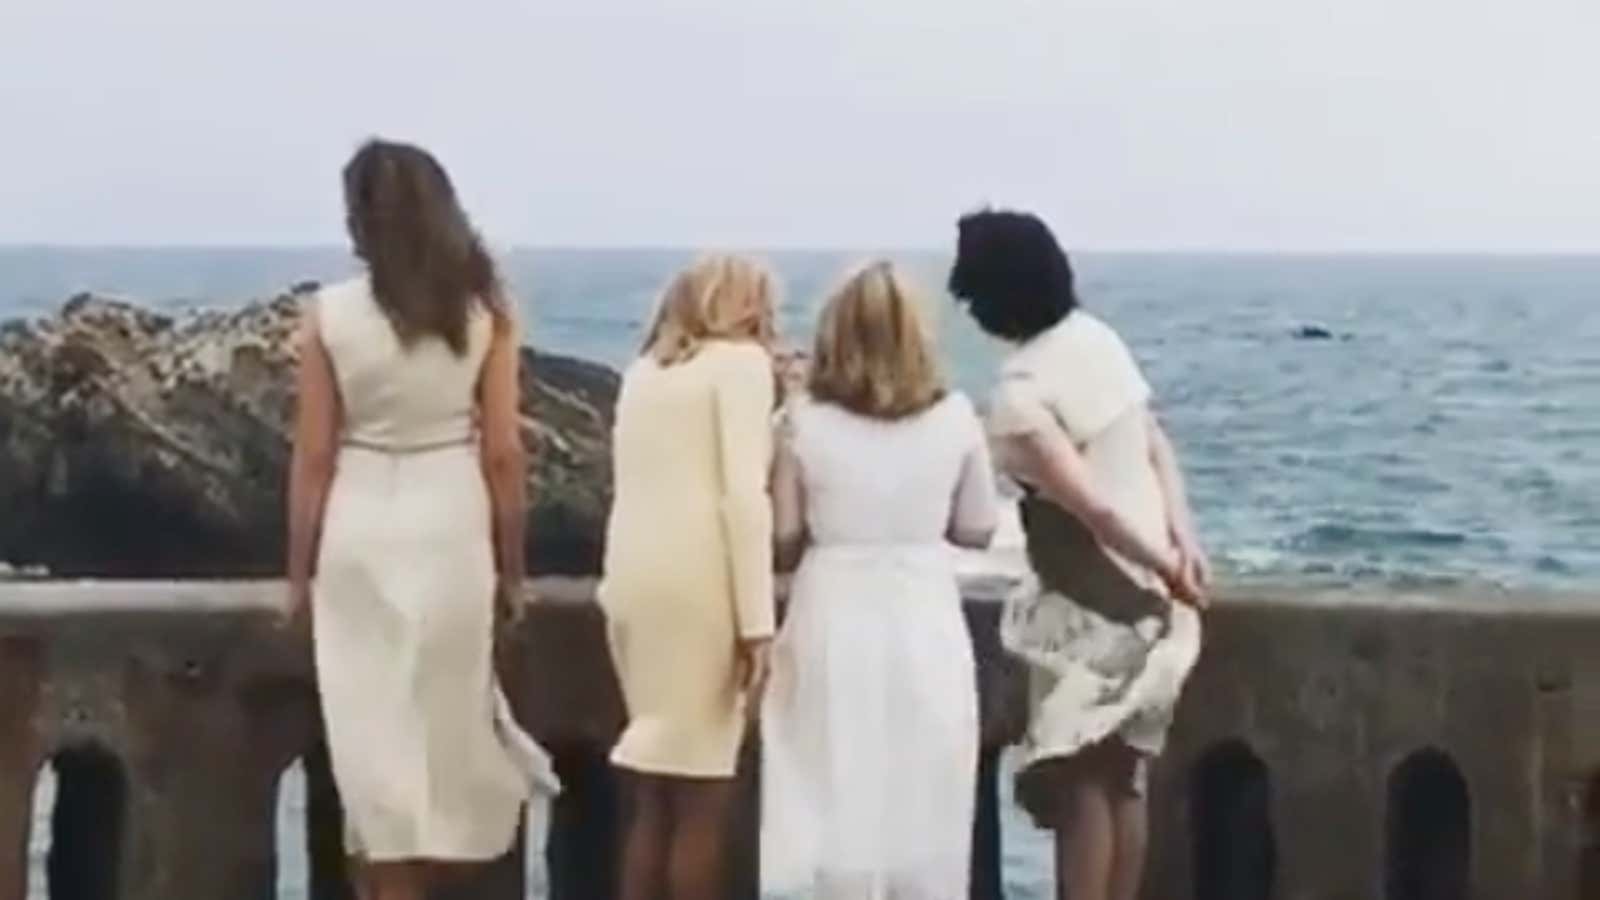 For Women’s Equality Day, this charming video of world leaders’ wives shows we’re not there yet